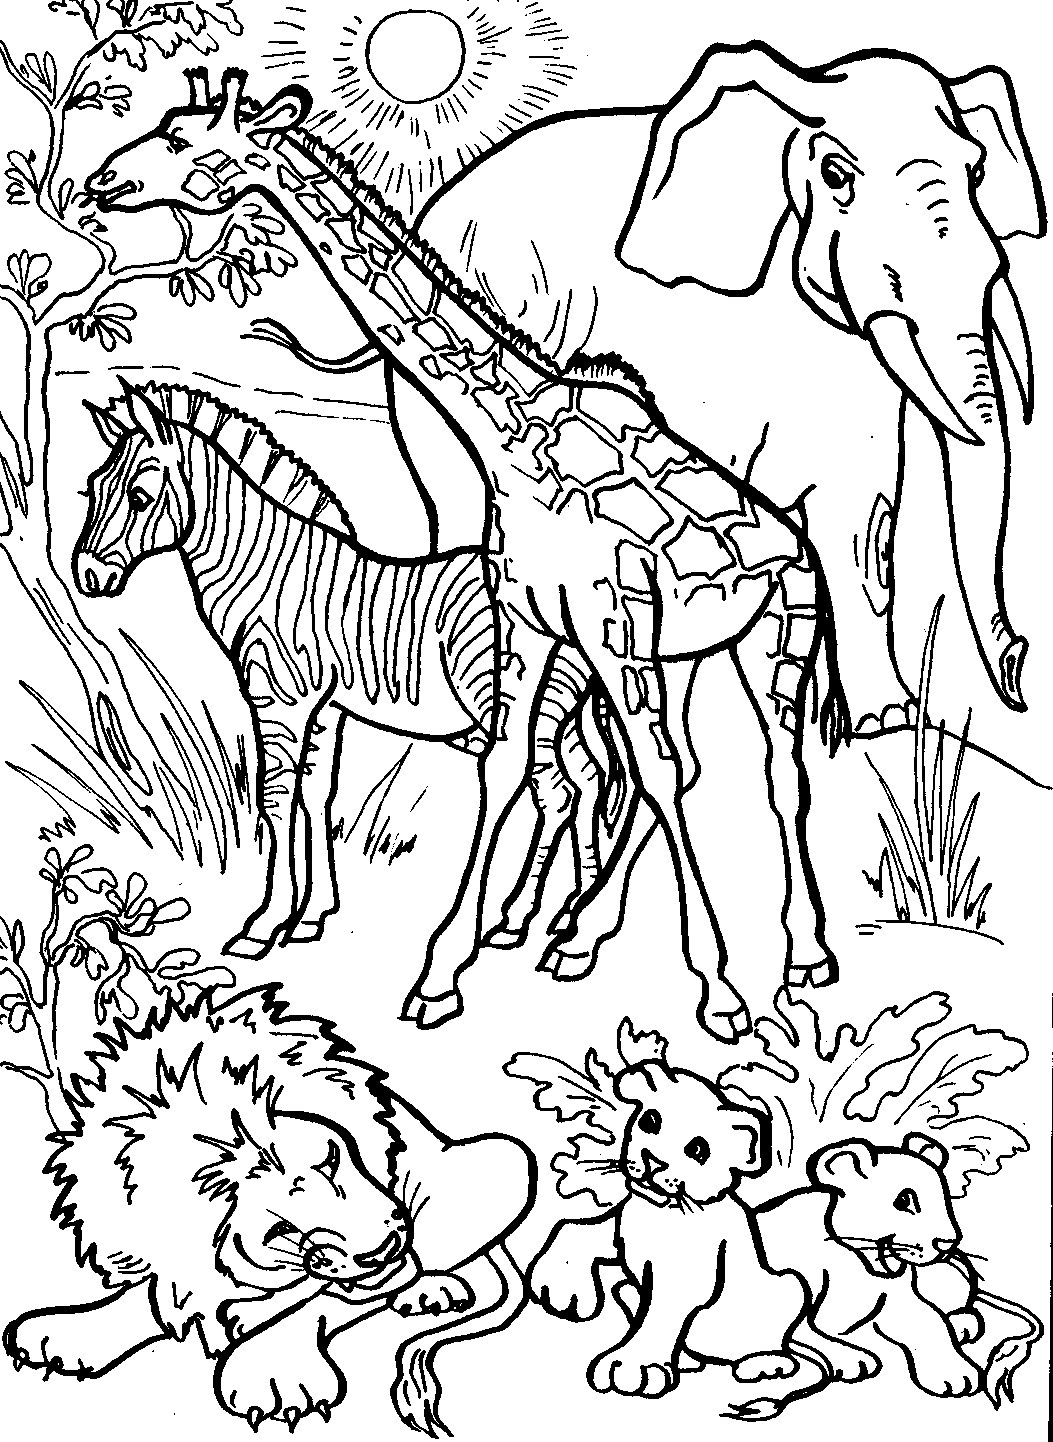 Download Animals of hot countries Coloring Pages to download and print for free